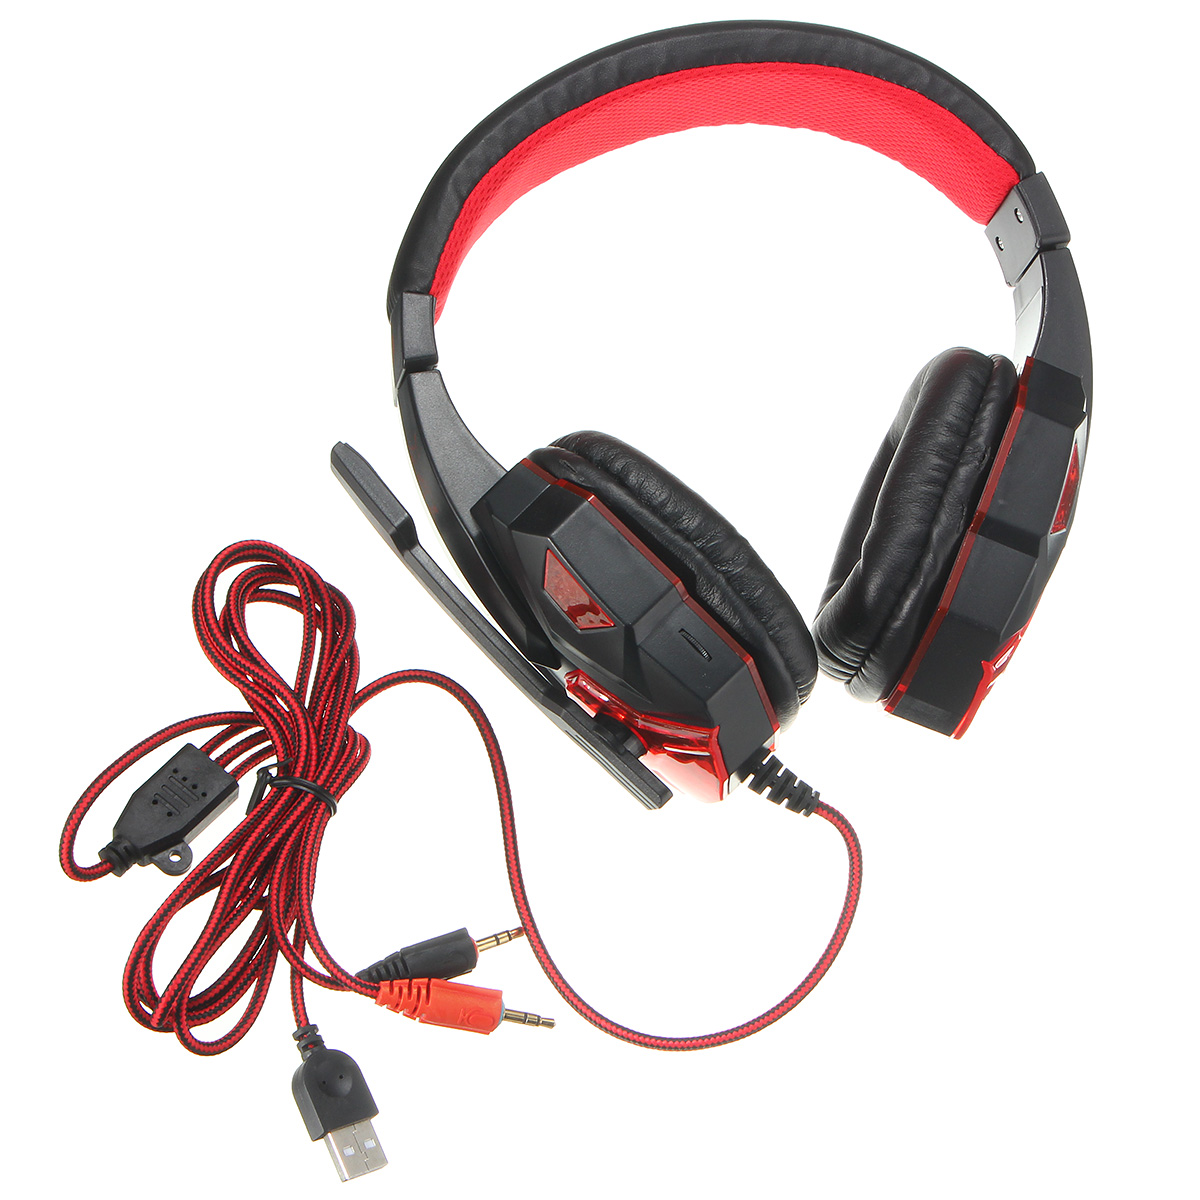 USB-35mm-LED-Surround-Stereo-Gaming-Headset-Headbrand-Headphone-With-Mic-1164073-5